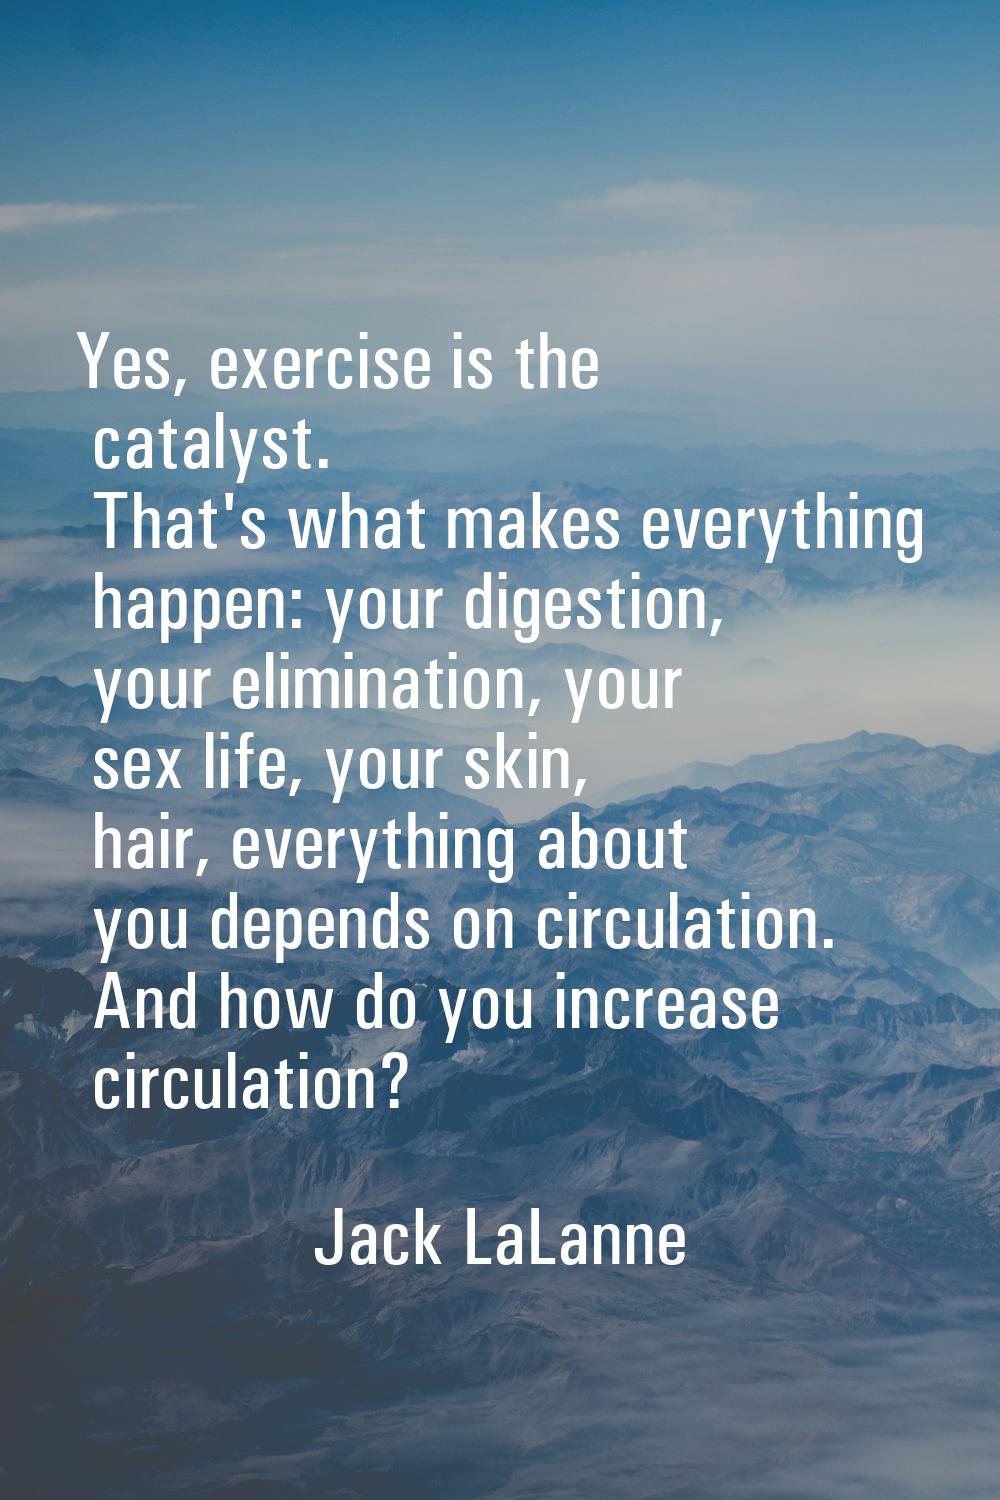 Yes, exercise is the catalyst. That's what makes everything happen: your digestion, your eliminatio